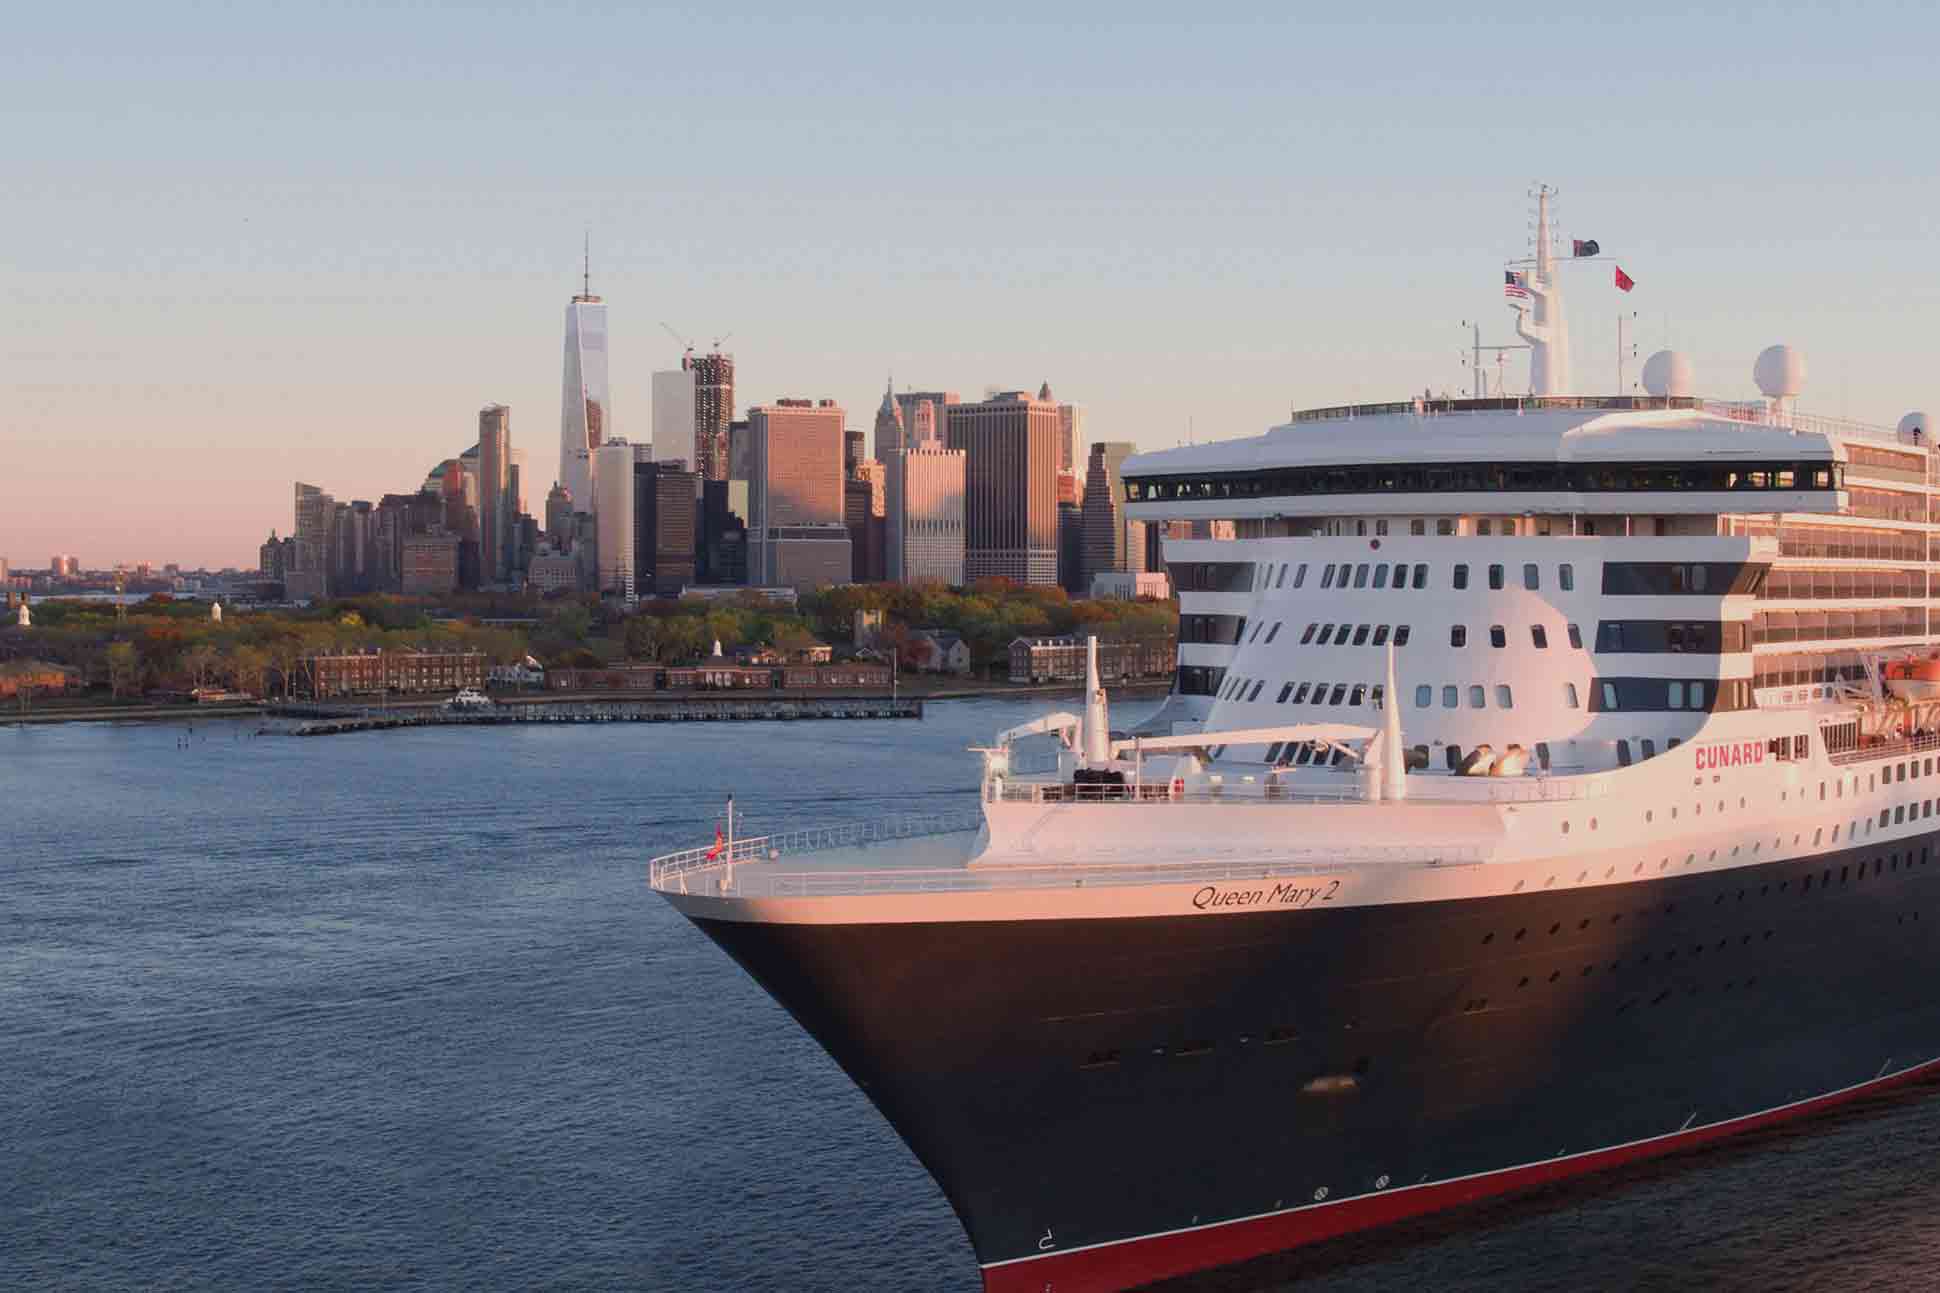 Cunard Queen Mary 2 in NYC, New York City, USA